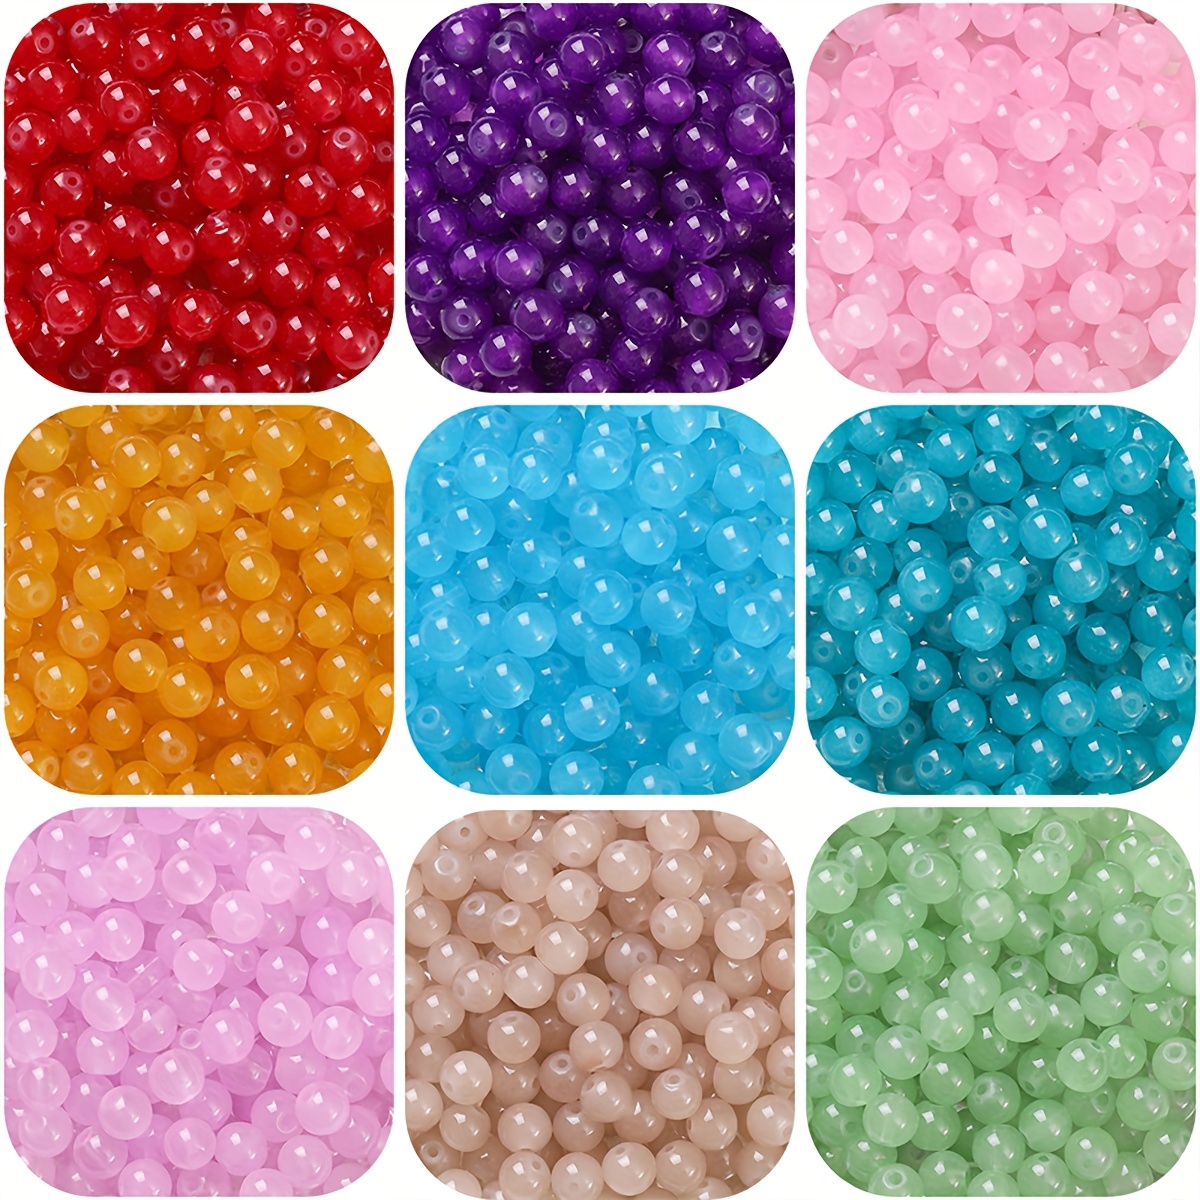 

200pcs Glass Beads For Diy Jewelry Making, Assorted Colors Handcrafted Round Bead Set For Bracelets And Accessories